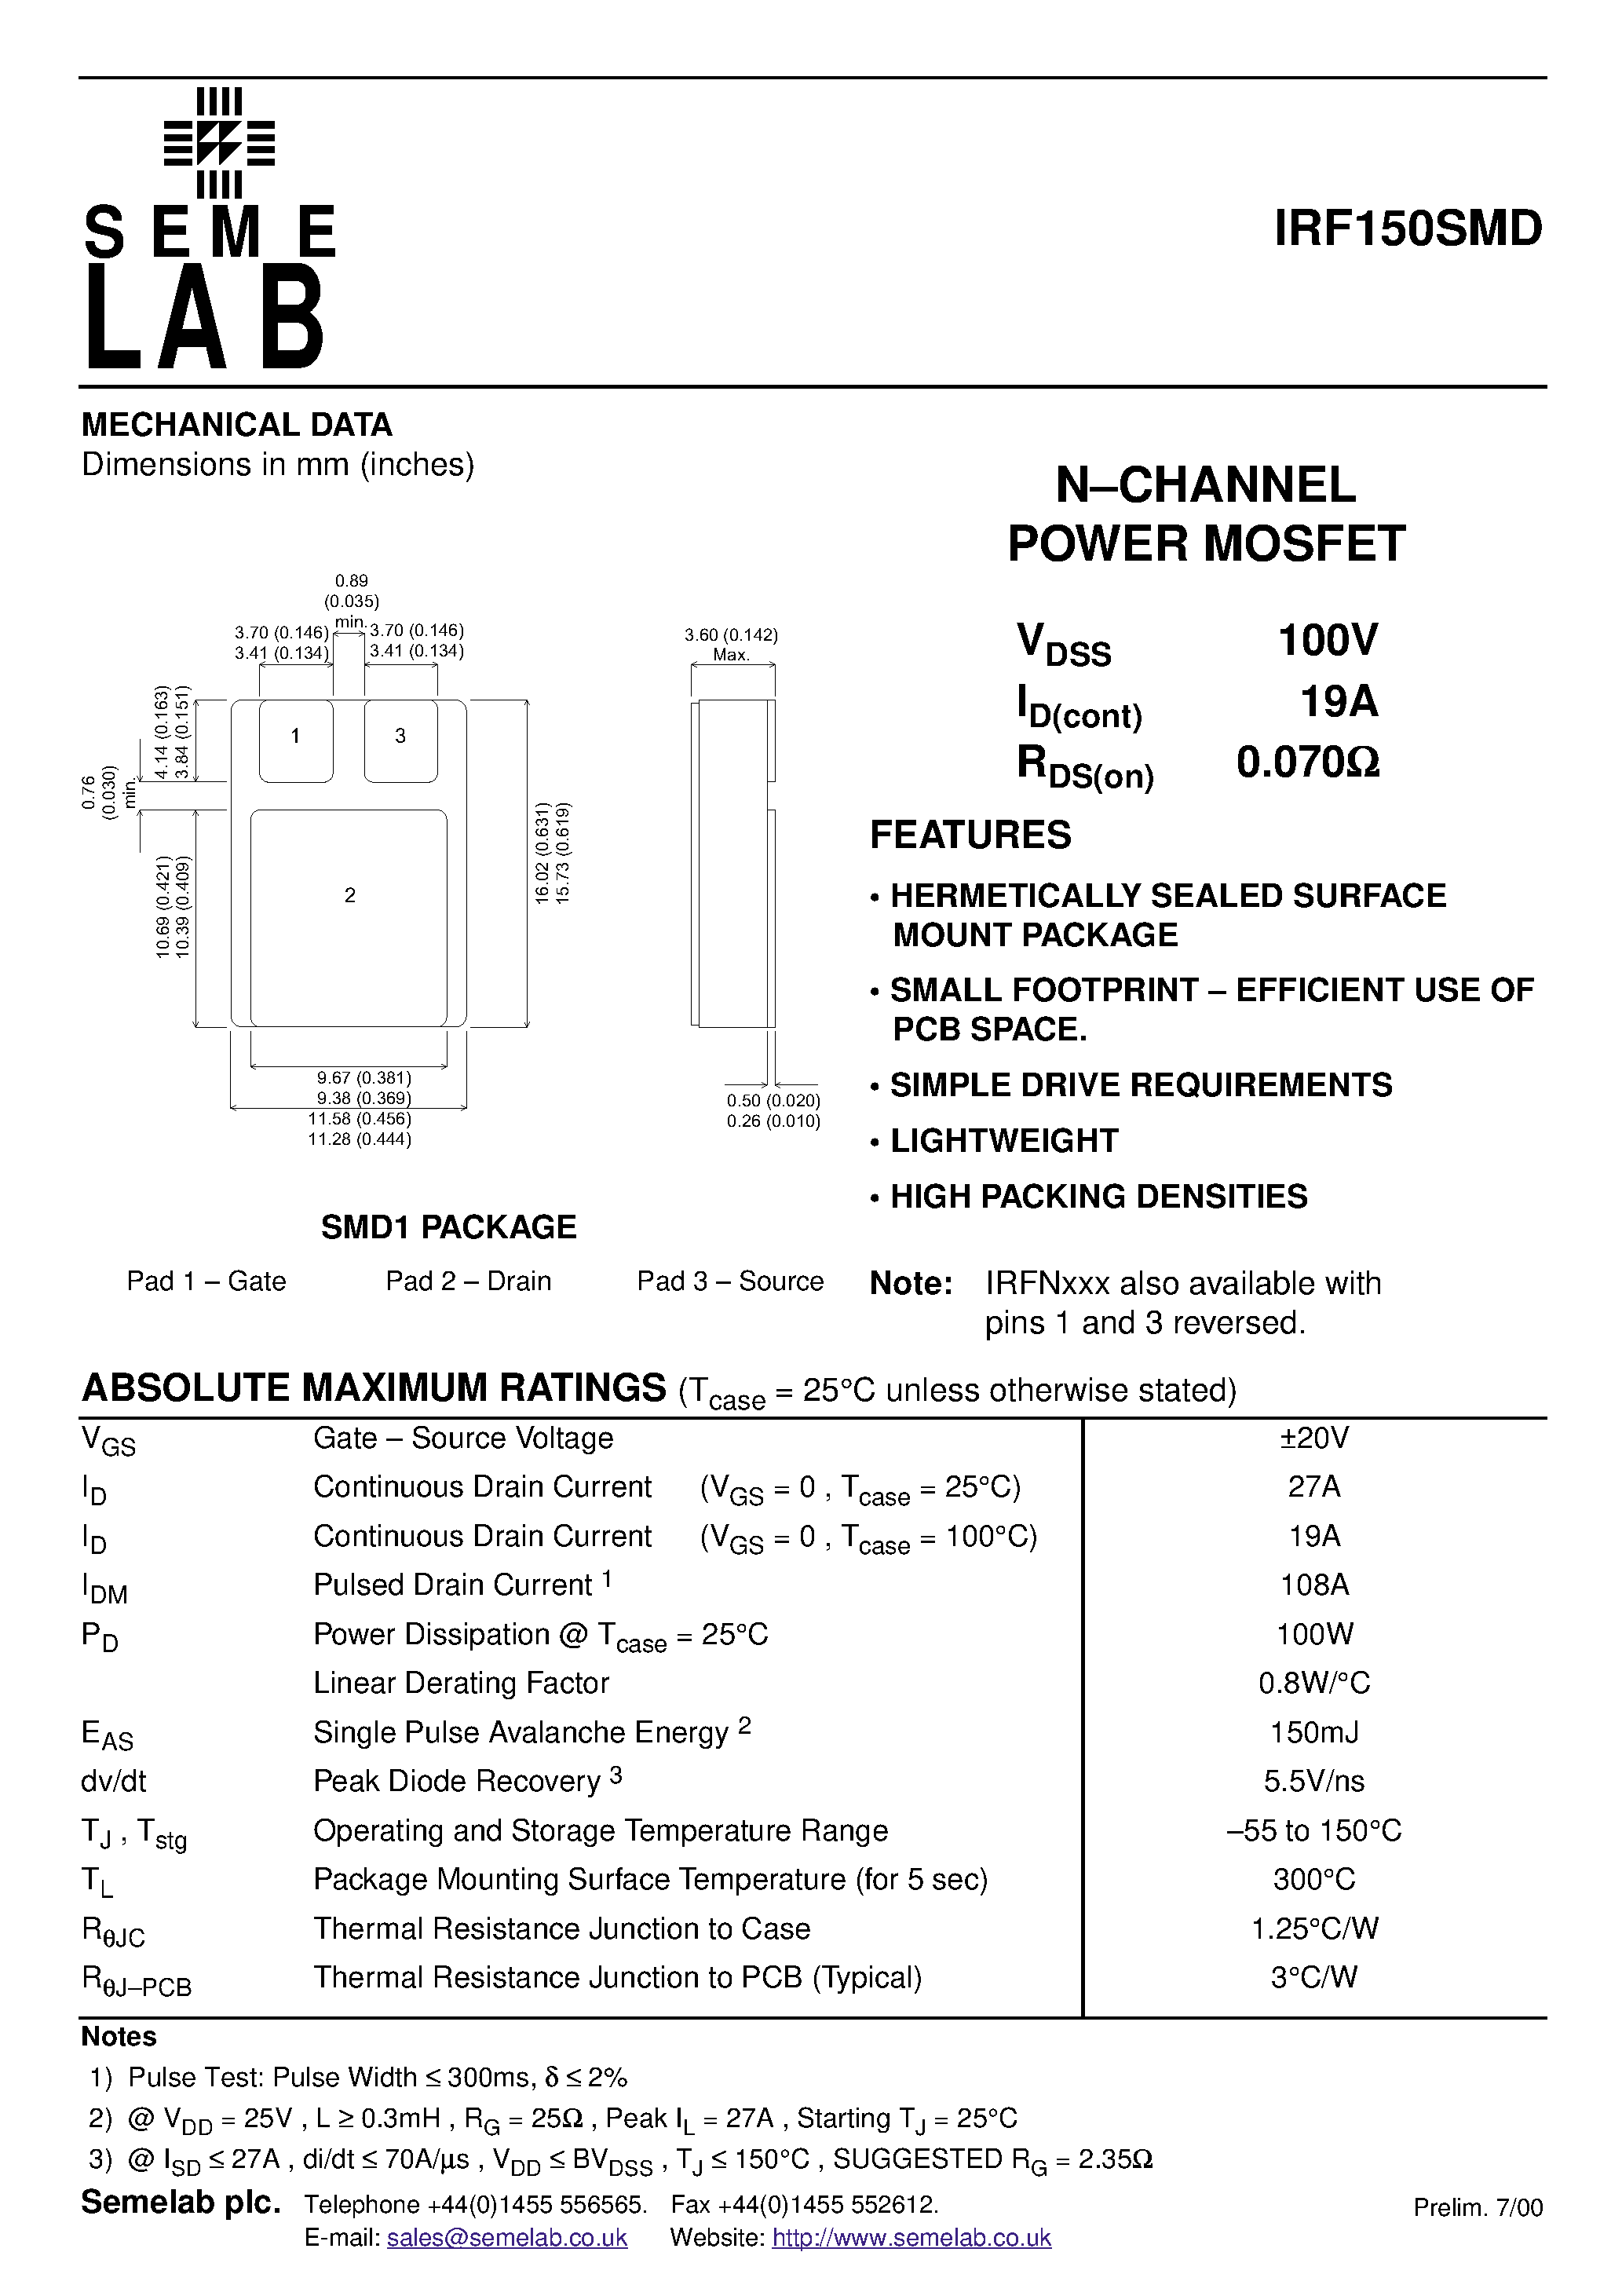 Datasheet IRF150SMD - N-CHANNEL POWER MOSFET page 1